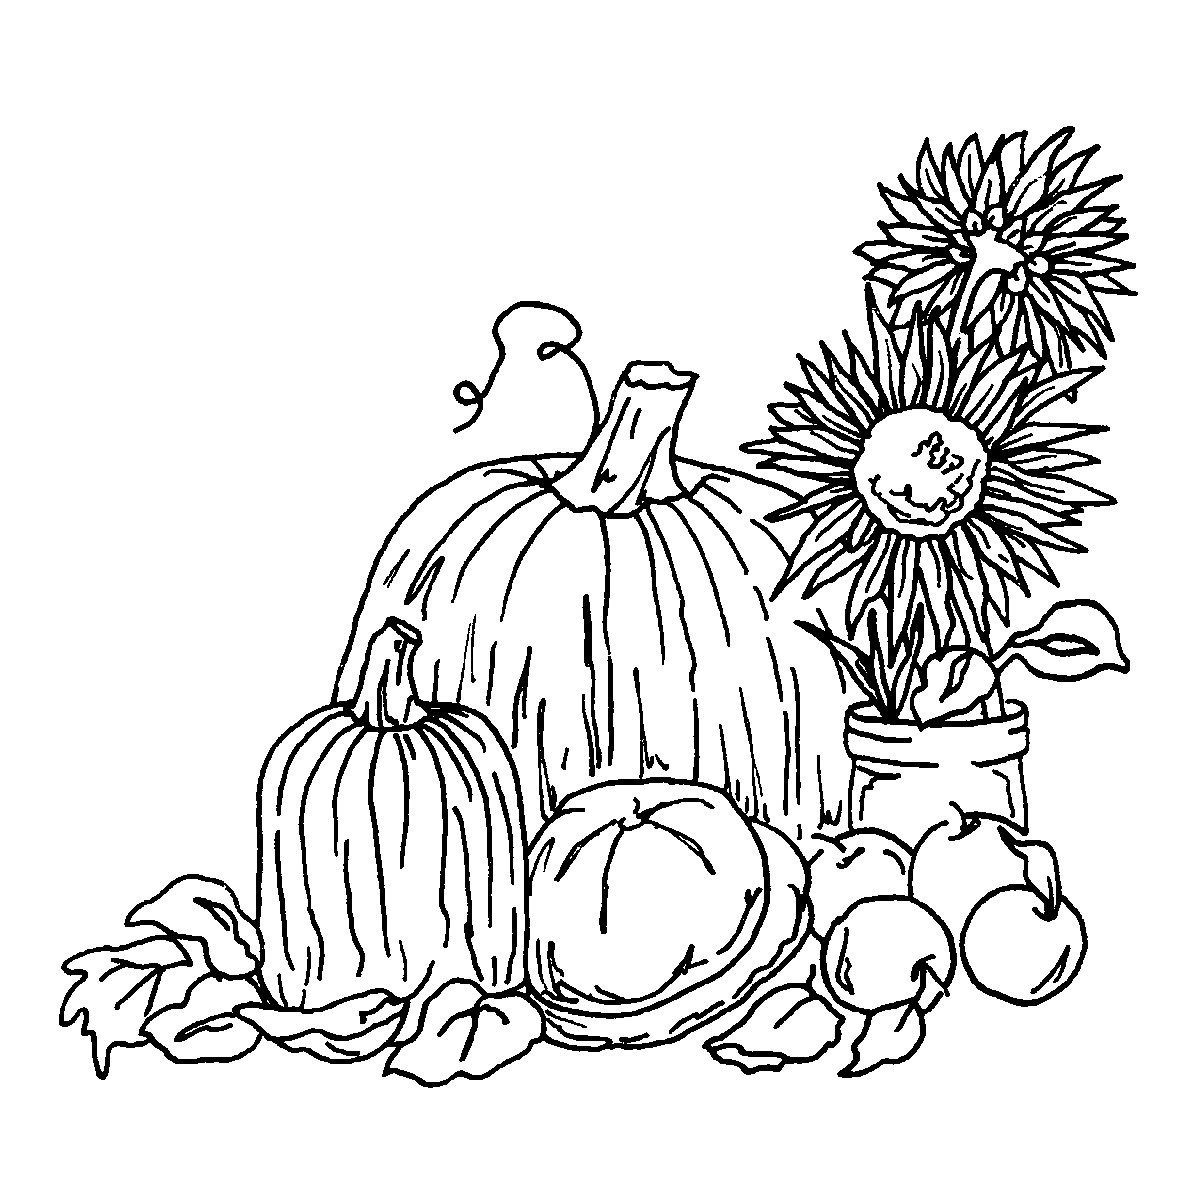 Printable Coloring Pages For Children
 Harvest Coloring Pages Best Coloring Pages For Kids